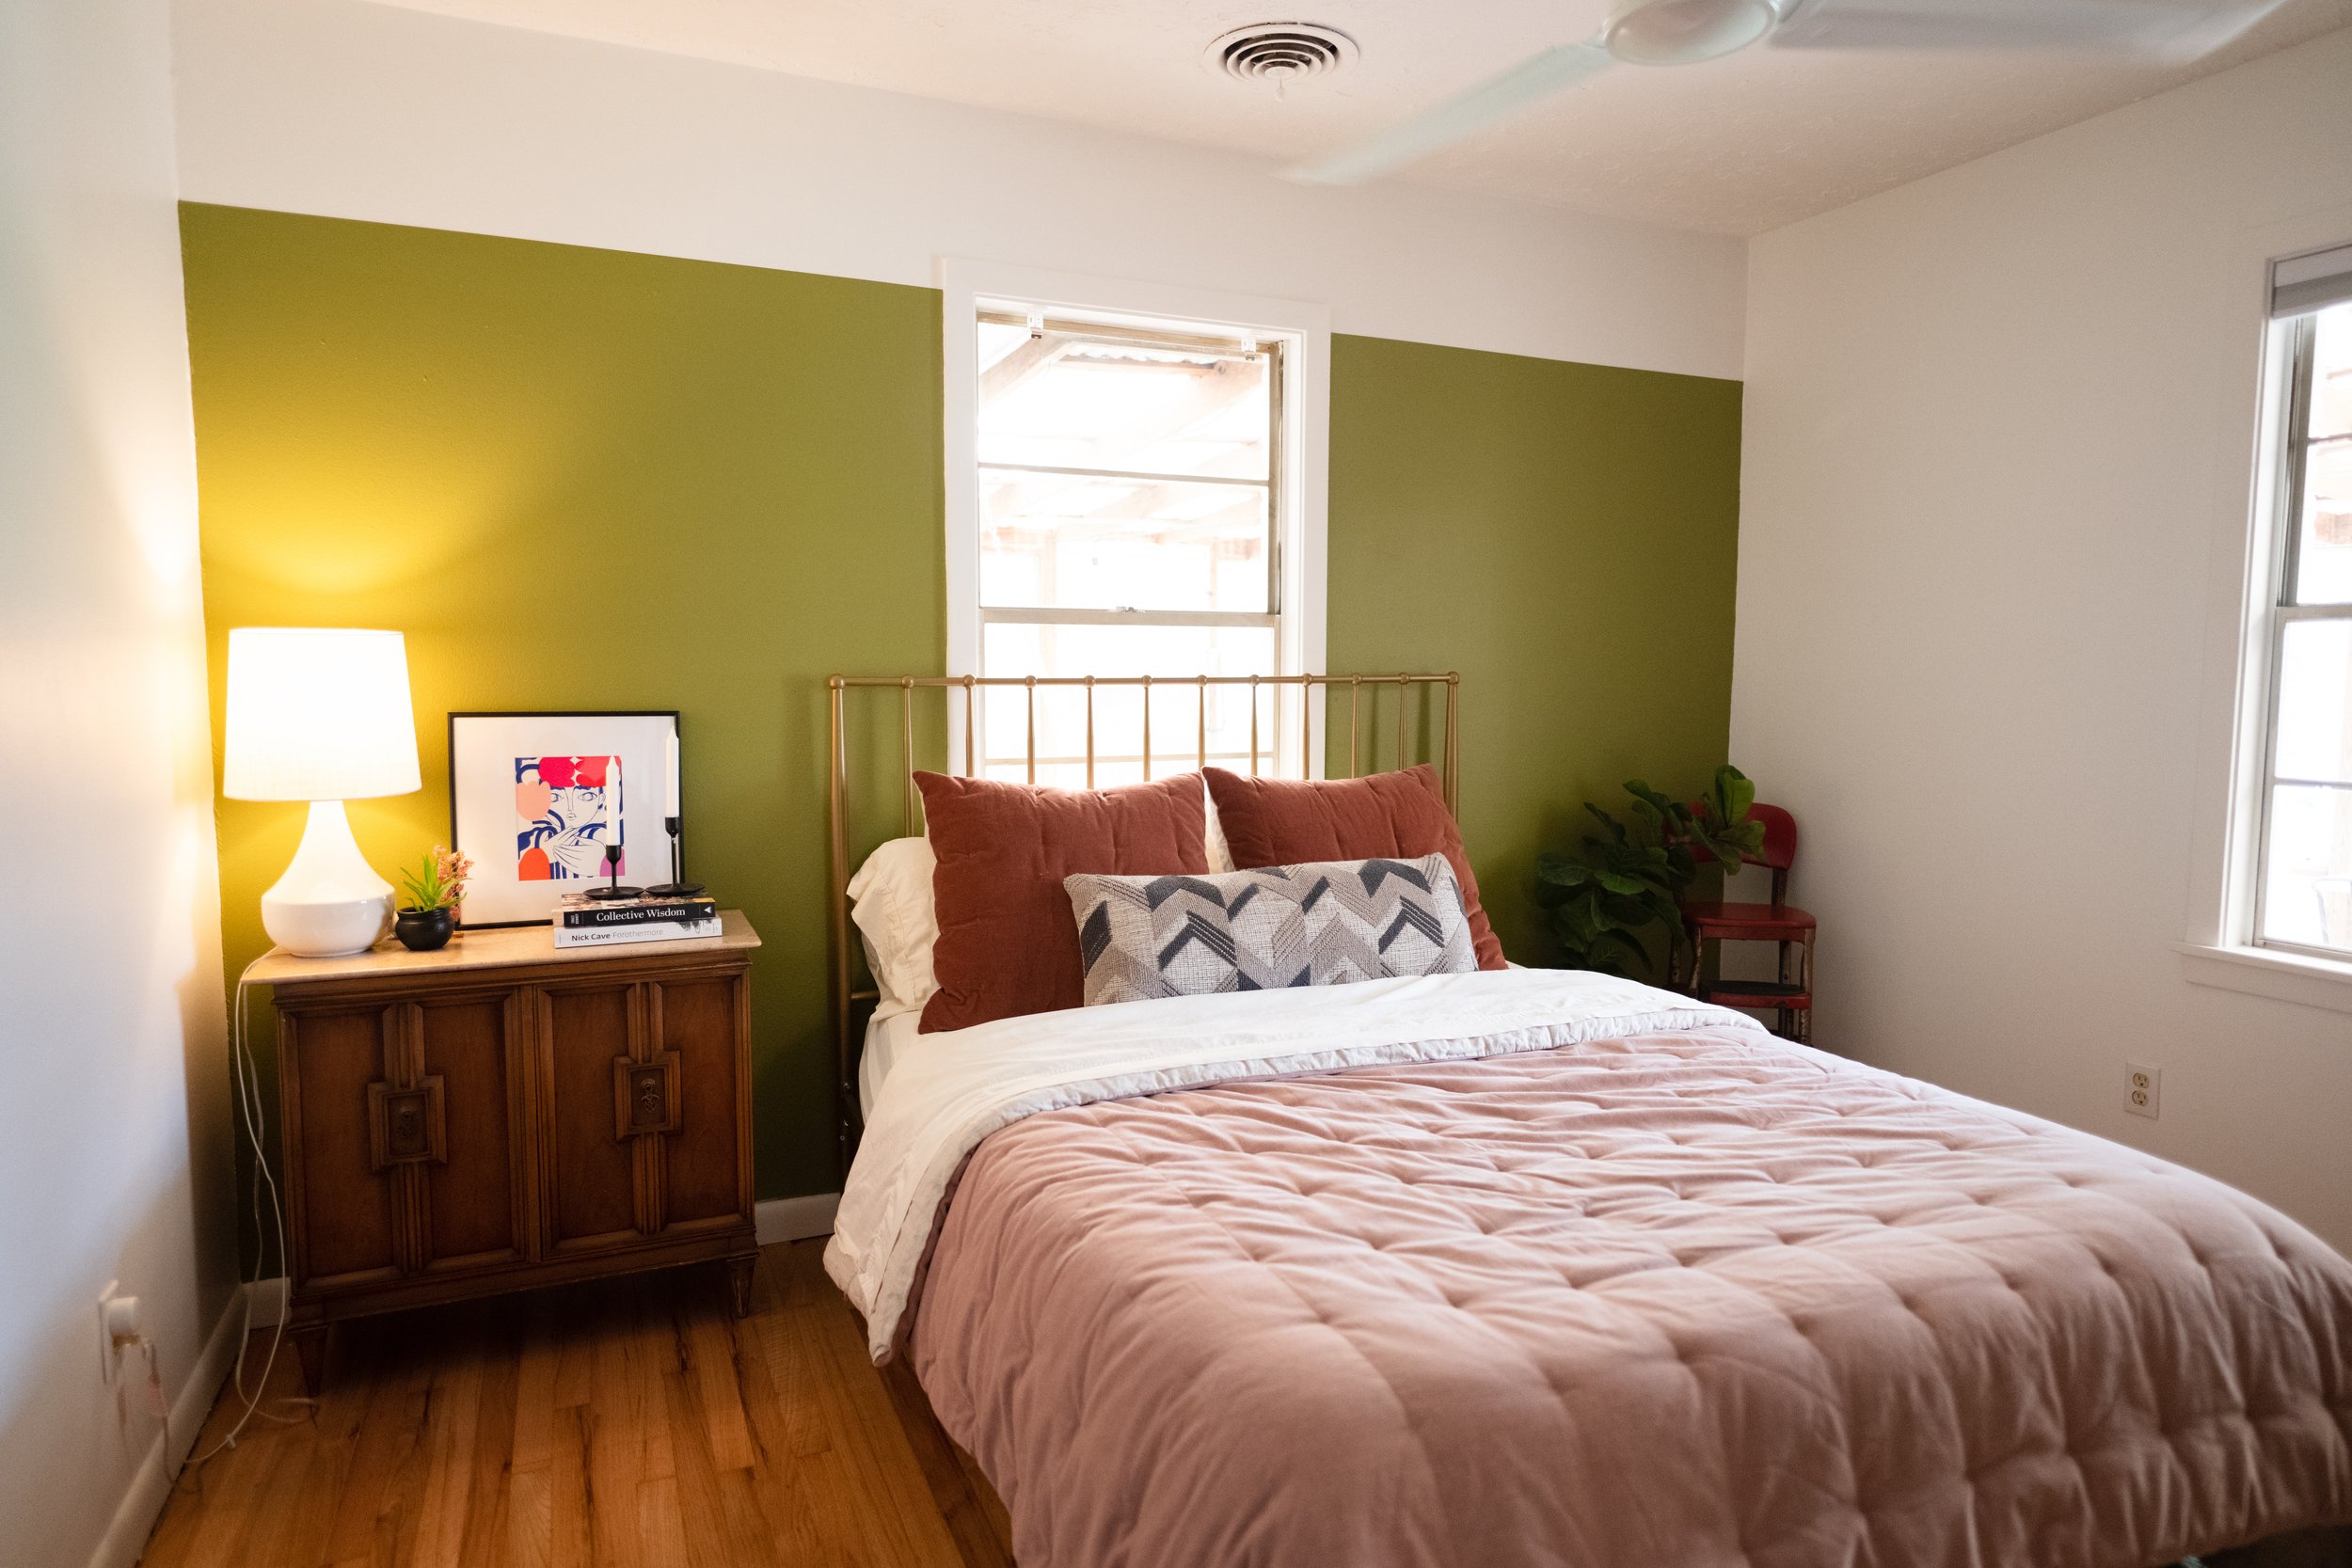 A bedroom with a chartreuse paint color accent wall